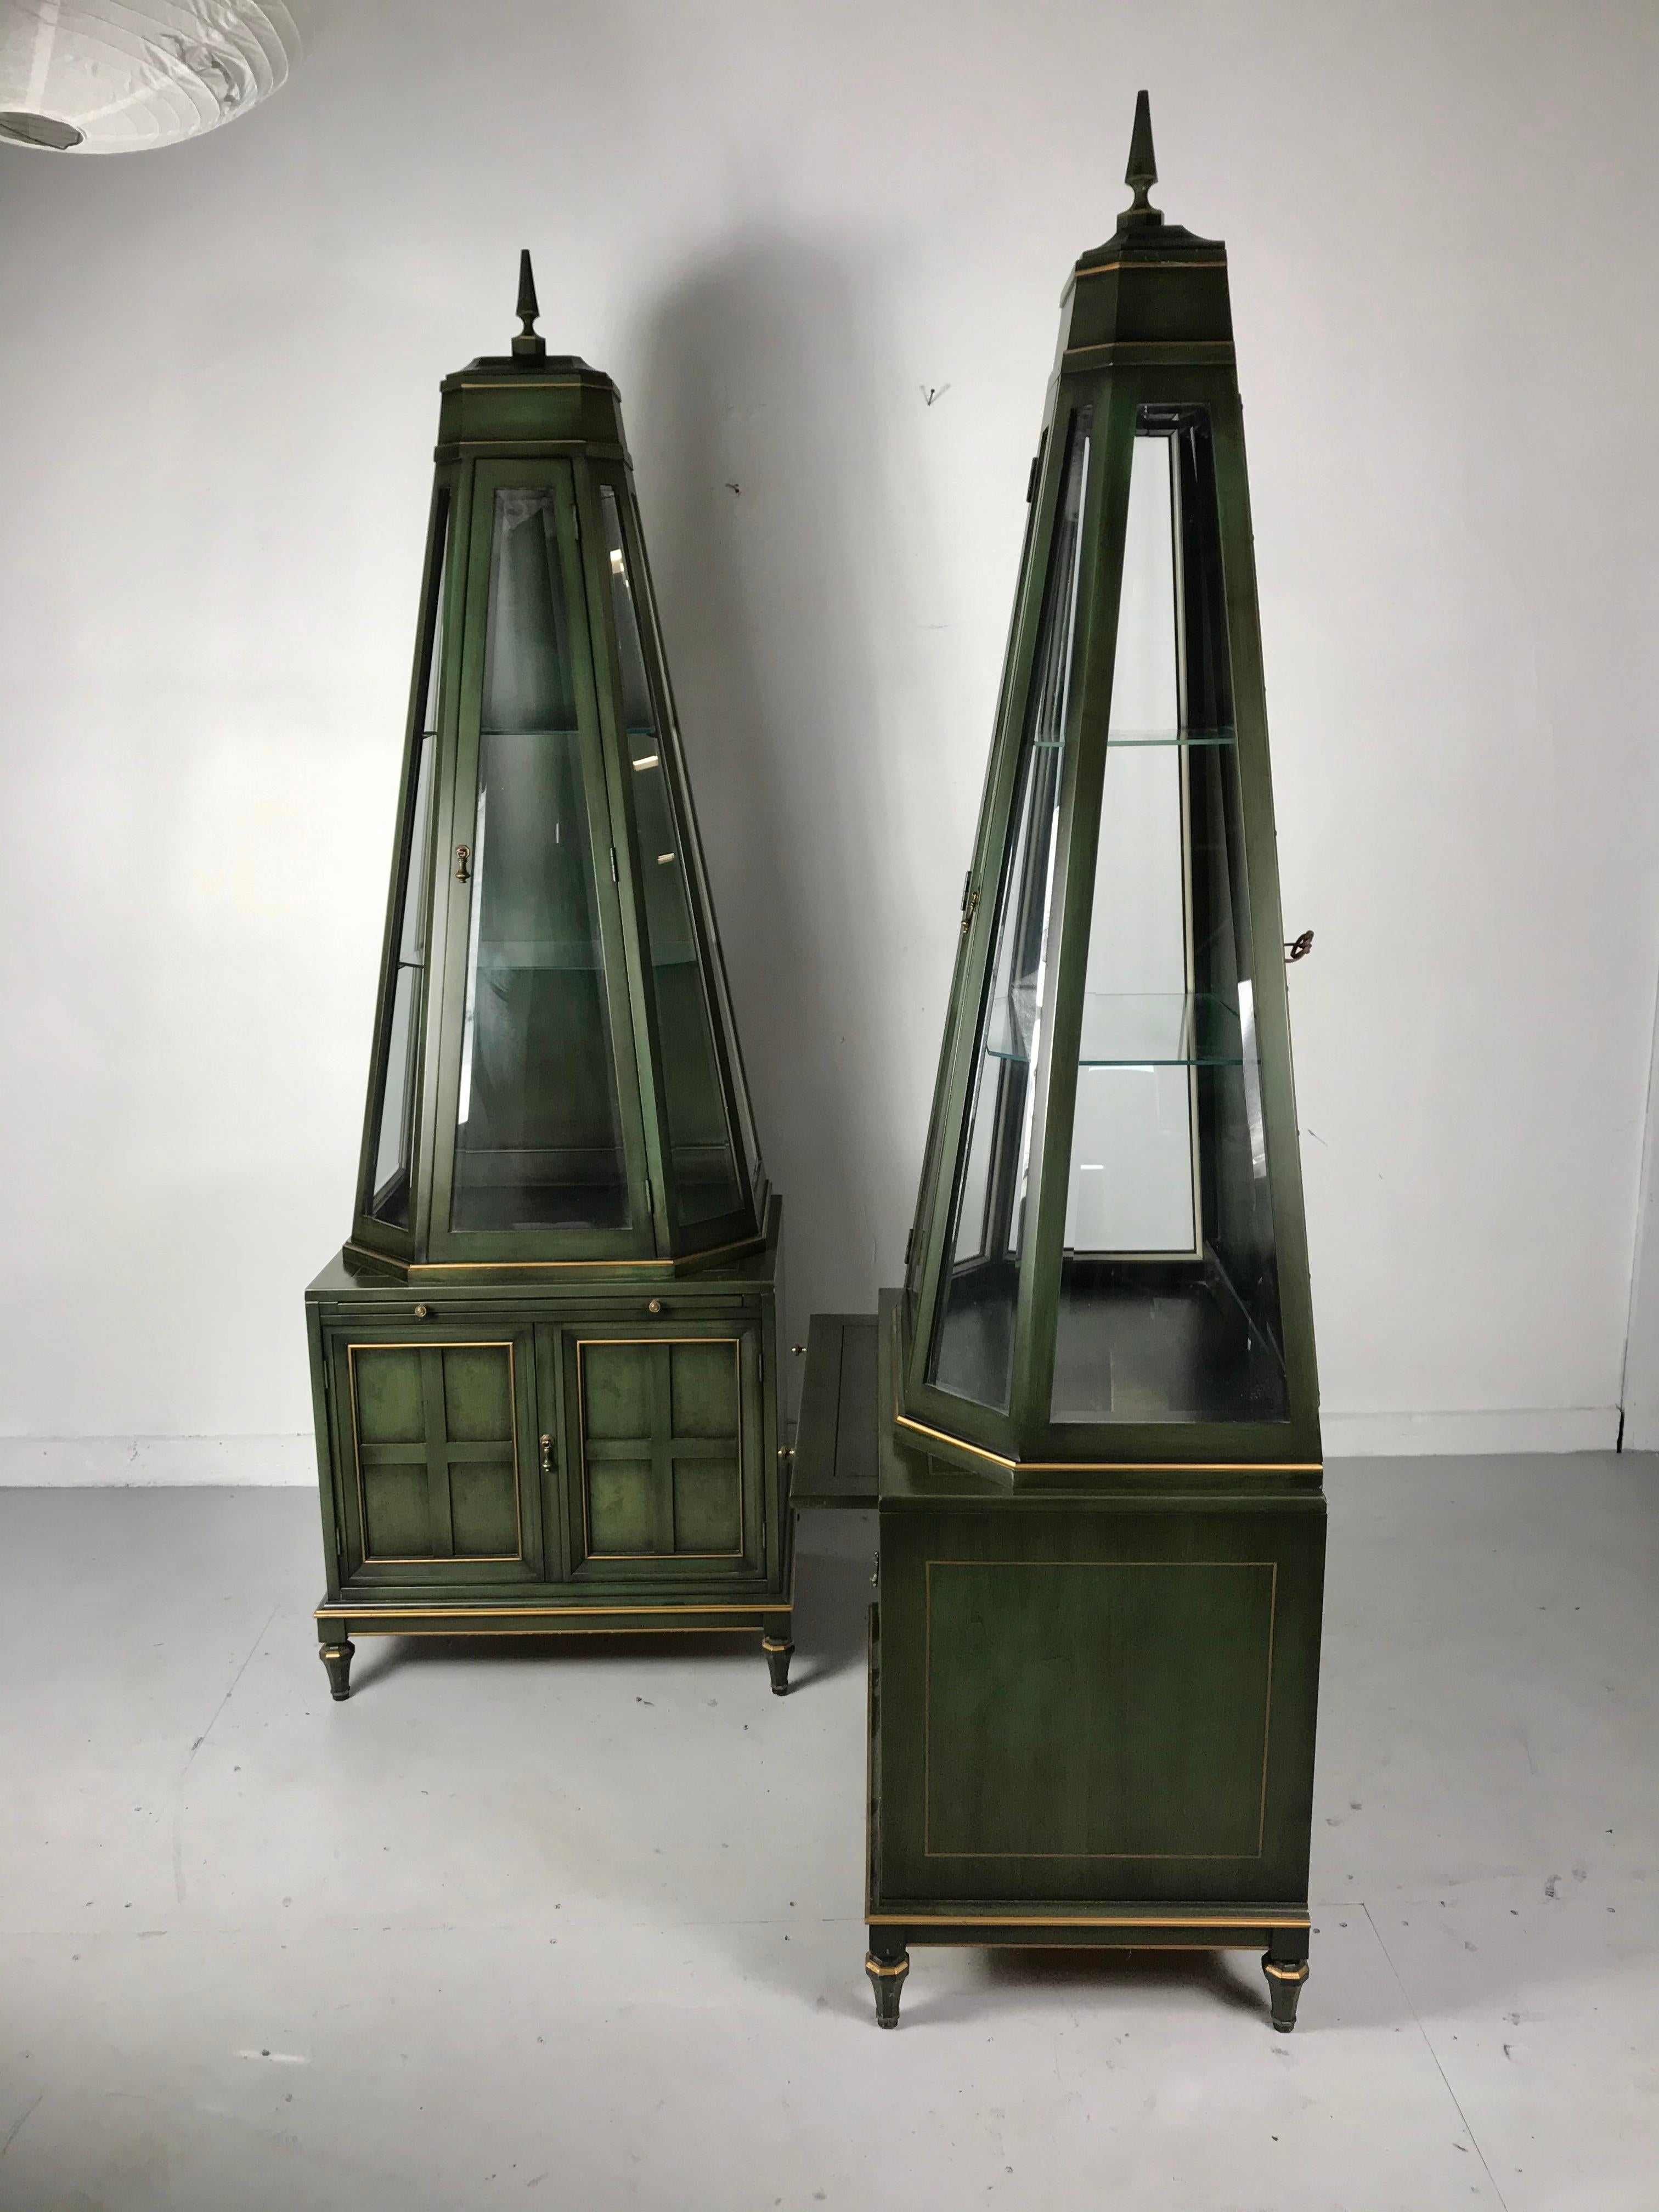 Unusual and stunning pair of decorative pyramidal curio cabinets, vitrines by Union National, beautiful hunter green with gold highlights, brass hardware and 3-sided beveled glass, triangle shape door, atop lower two-door cabinet and pull out /